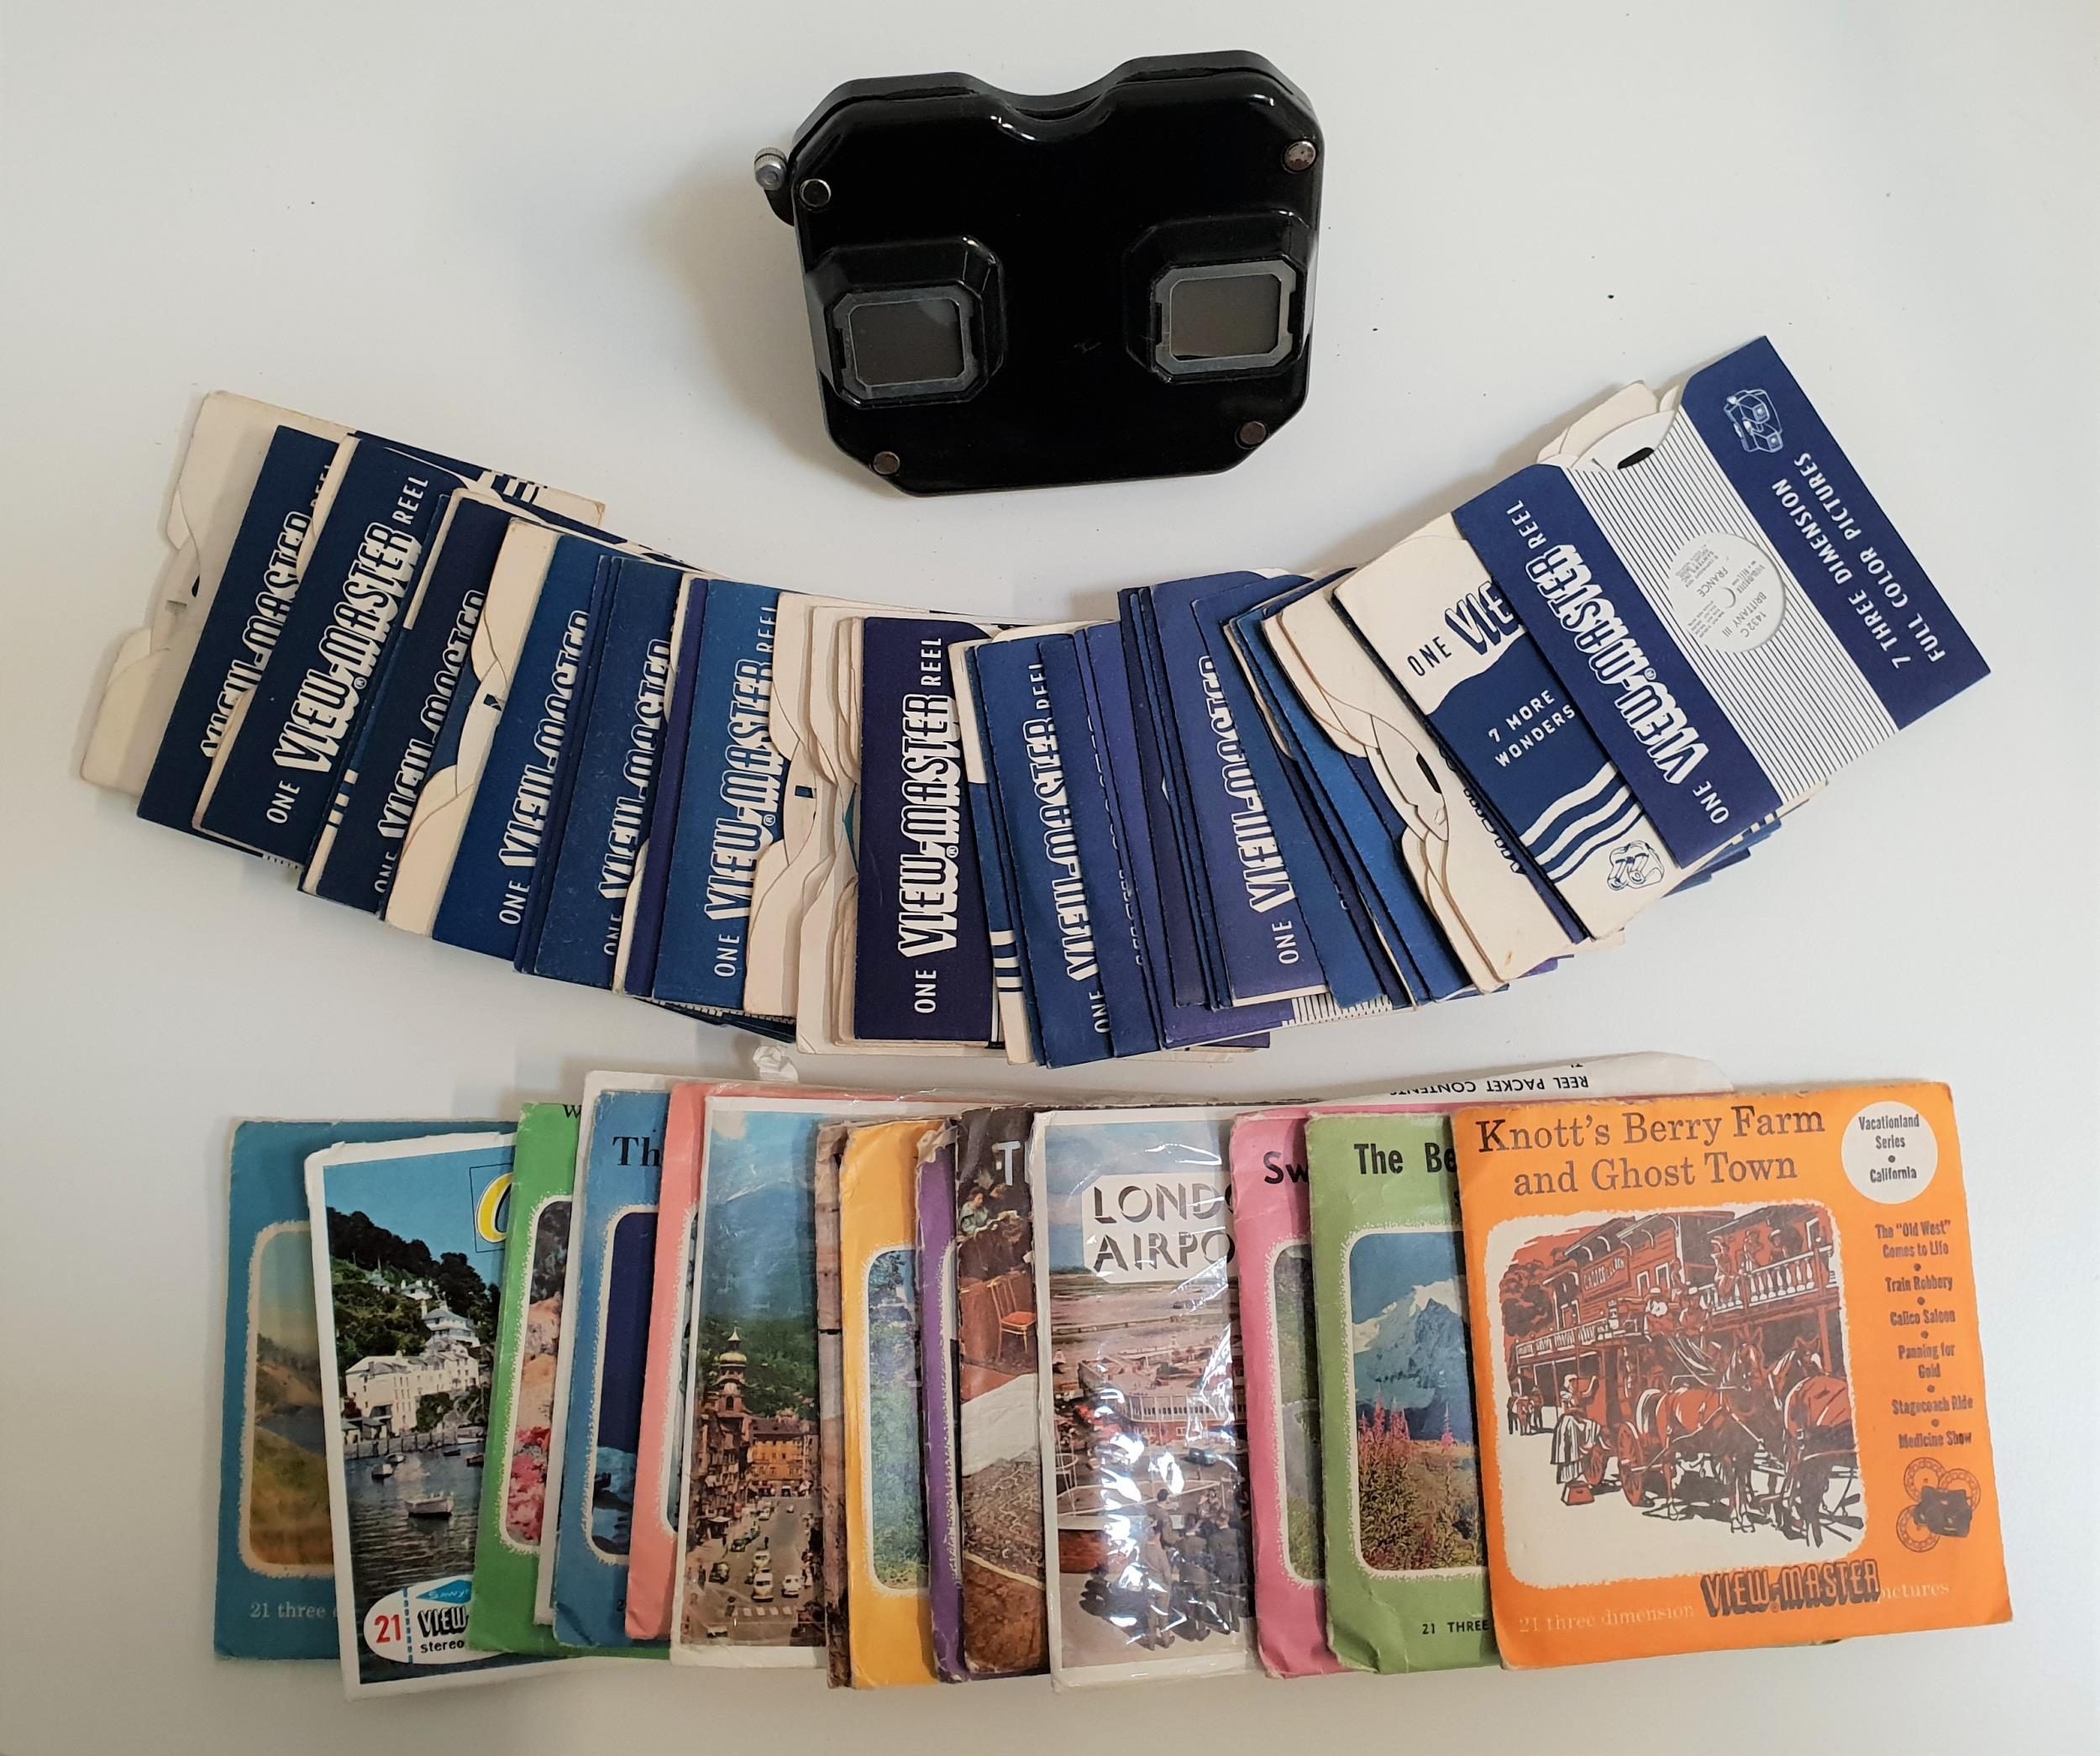 SAWYERS VIEW-MASTER STEREO CAMERA together with sixty three view cards, including weddings, cities